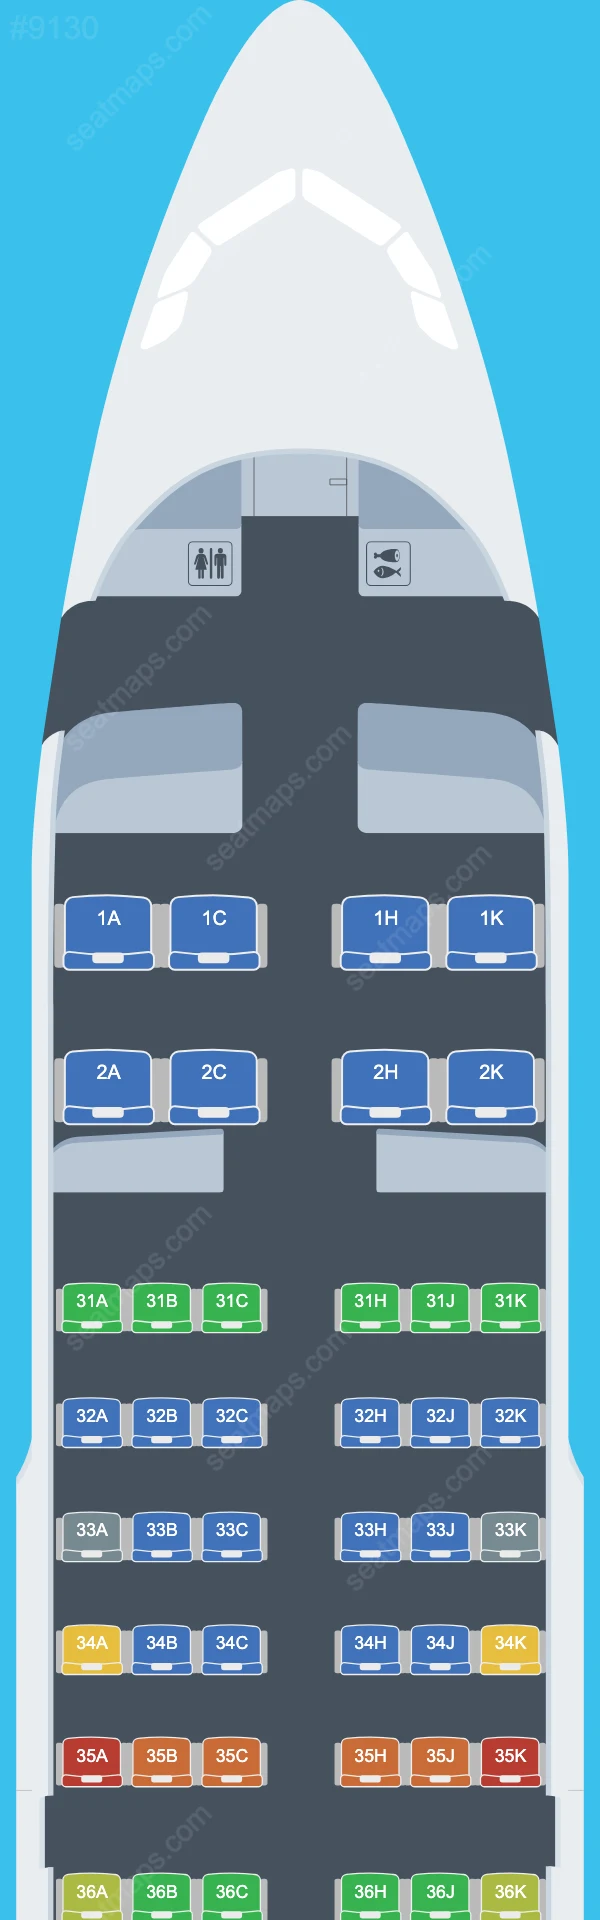 China Southern Airbus A319 Seat Maps A319-100 V.3